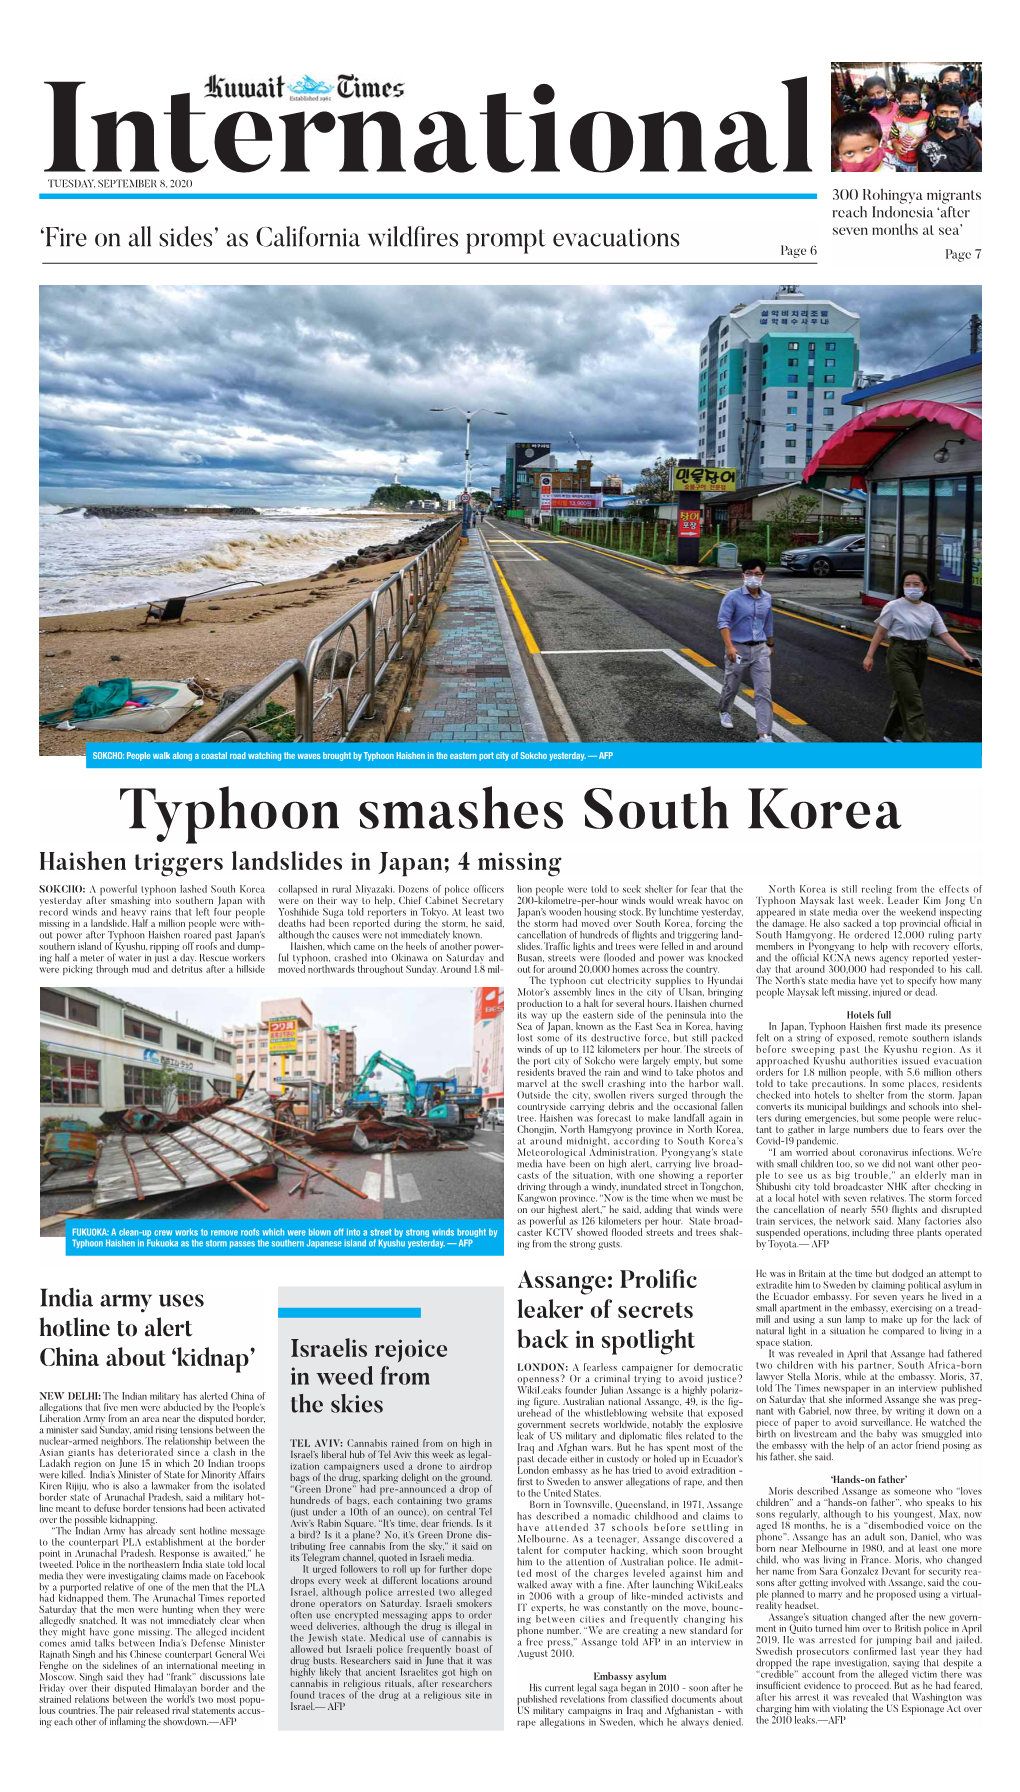 Typhoon Smashes South Korea Haishen Triggers Landslides in Japan; 4 Missing SOKCHO: a Powerful Typhoon Lashed South Korea Collapsed in Rural Miyazaki